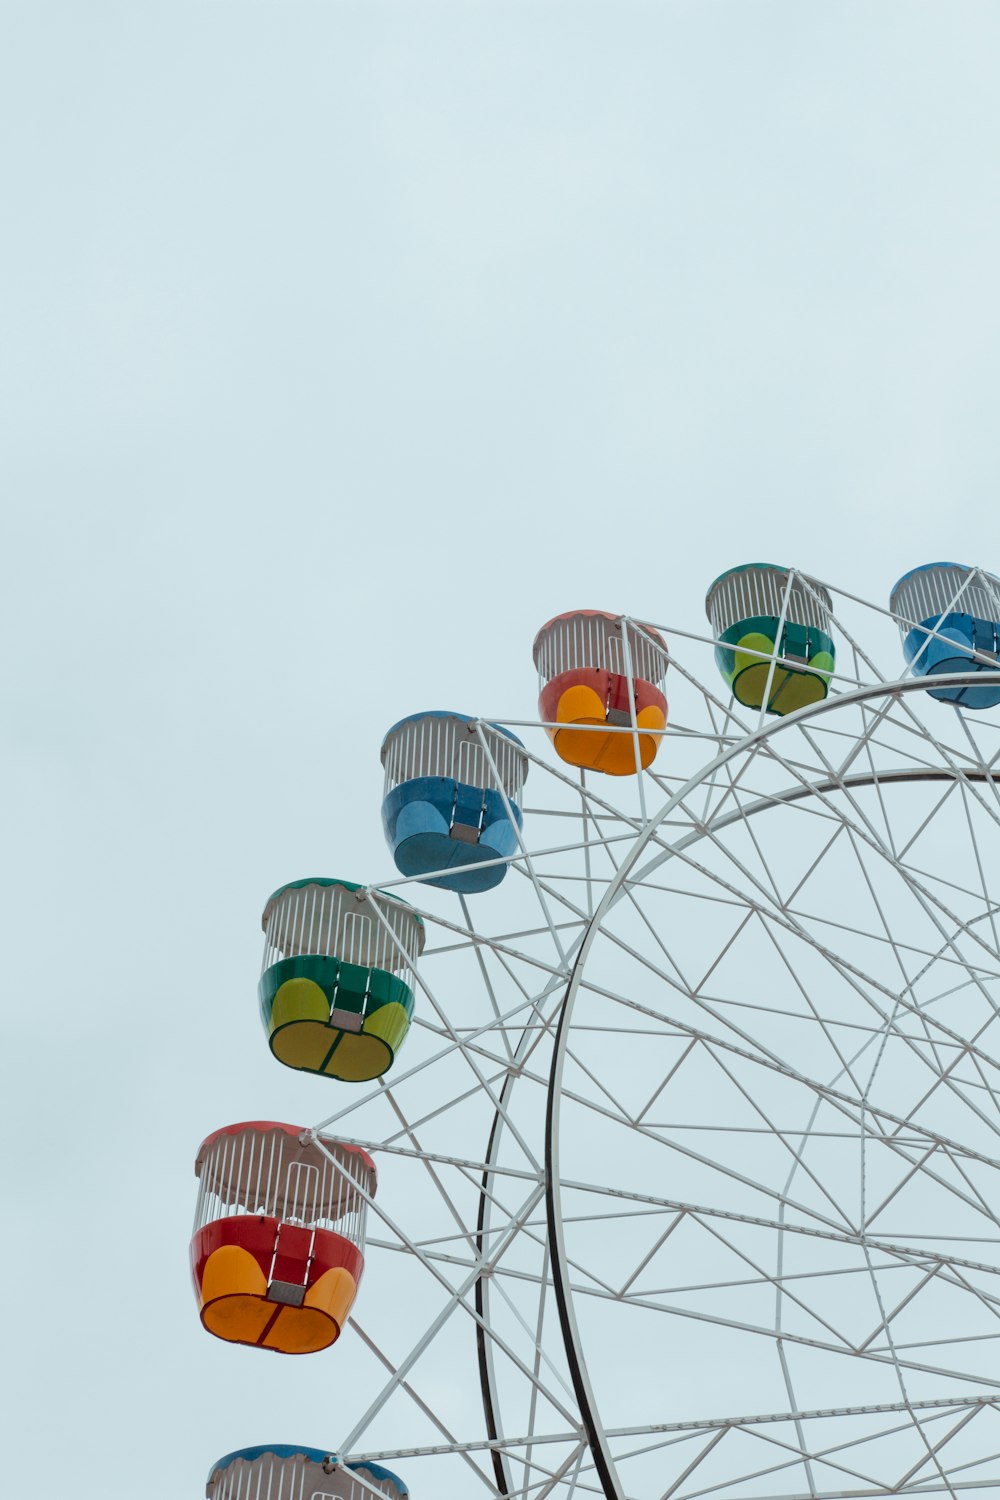 a ferris wheel with colorful seats on a cloudy day